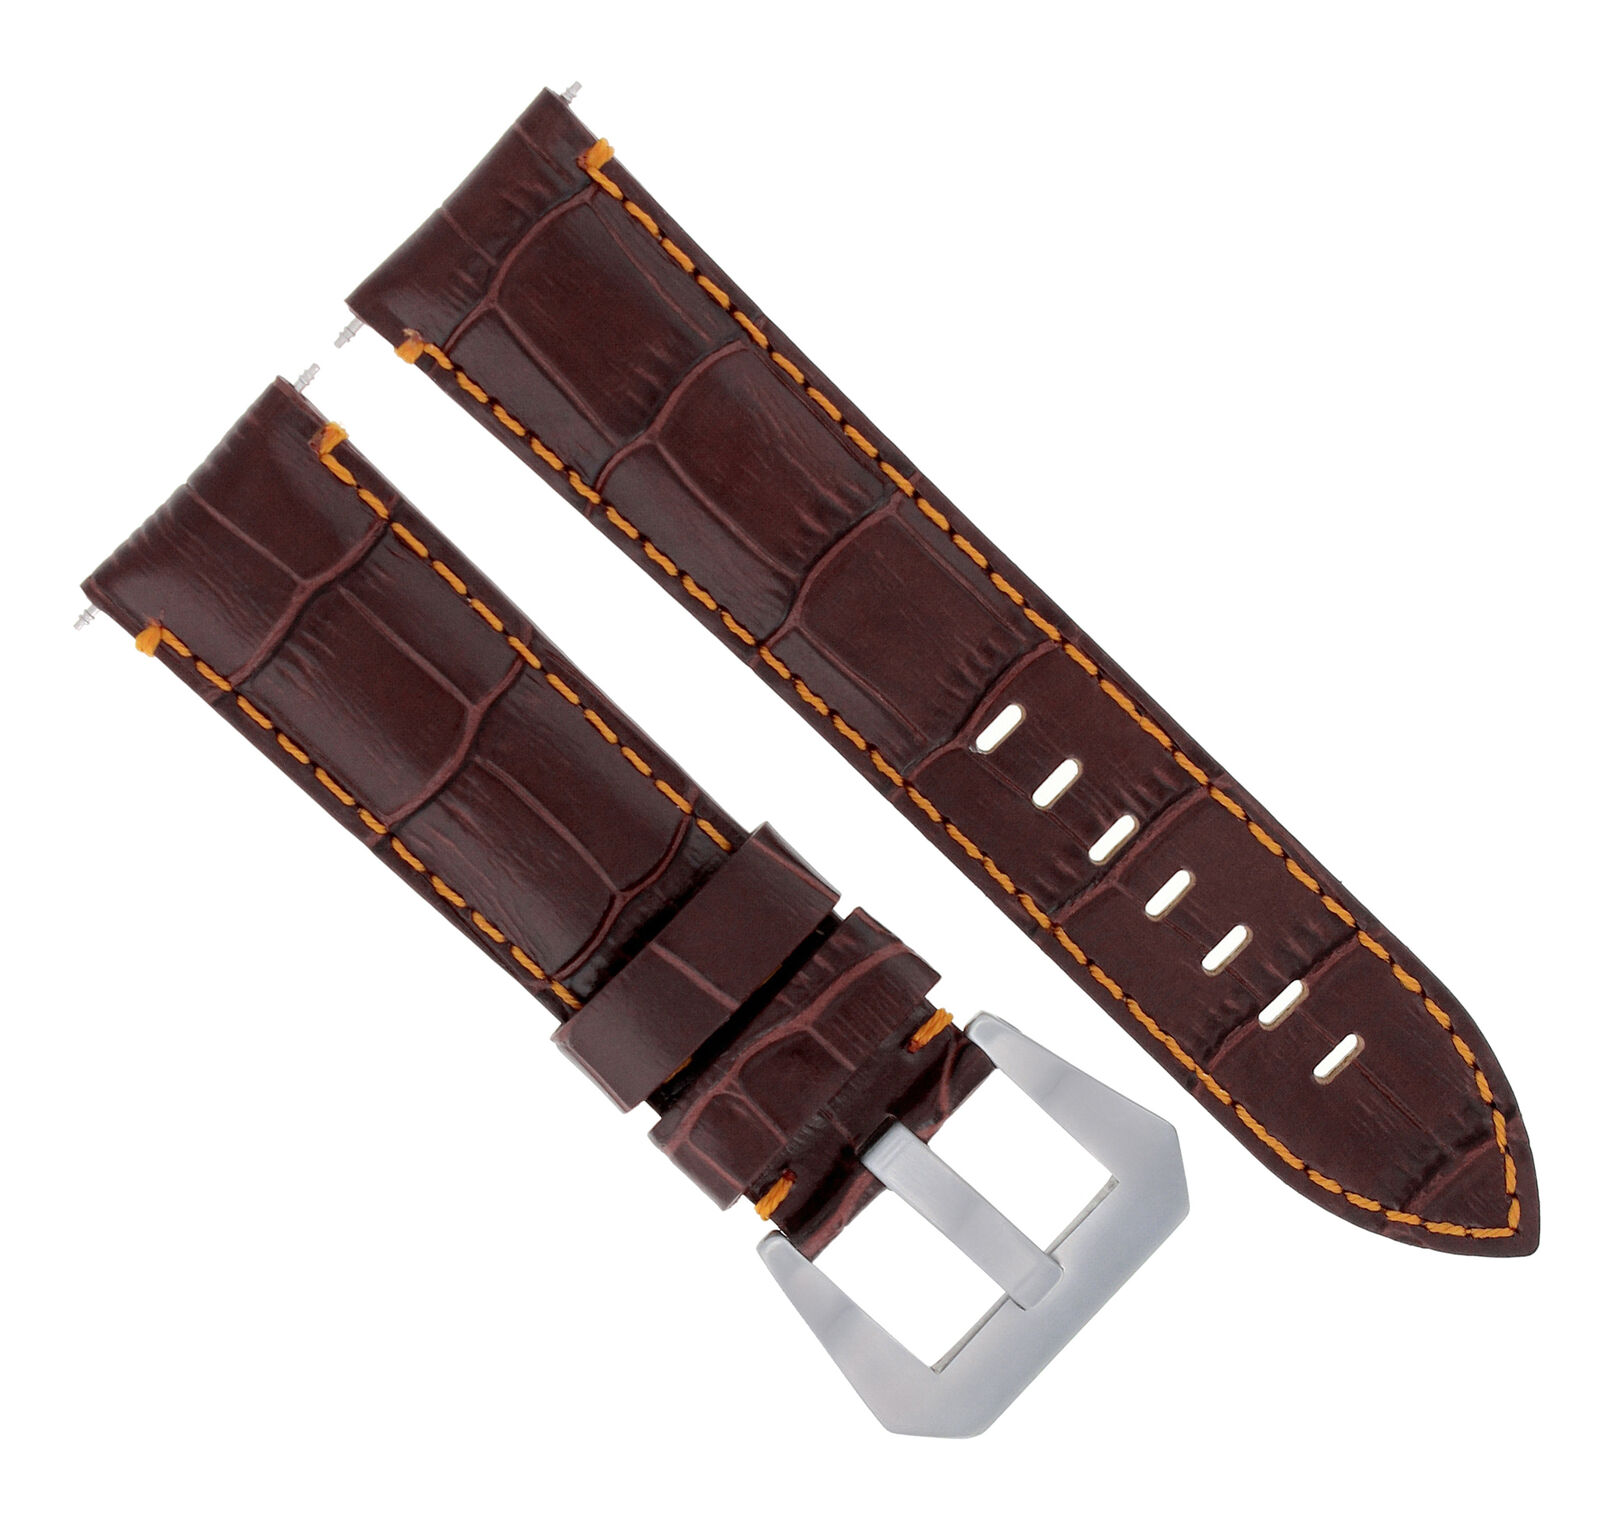 22MM LEATHER WATCH BAND STRAP FOR ANONIMO SAILOR WATCH BROWN ORANGE STITCH